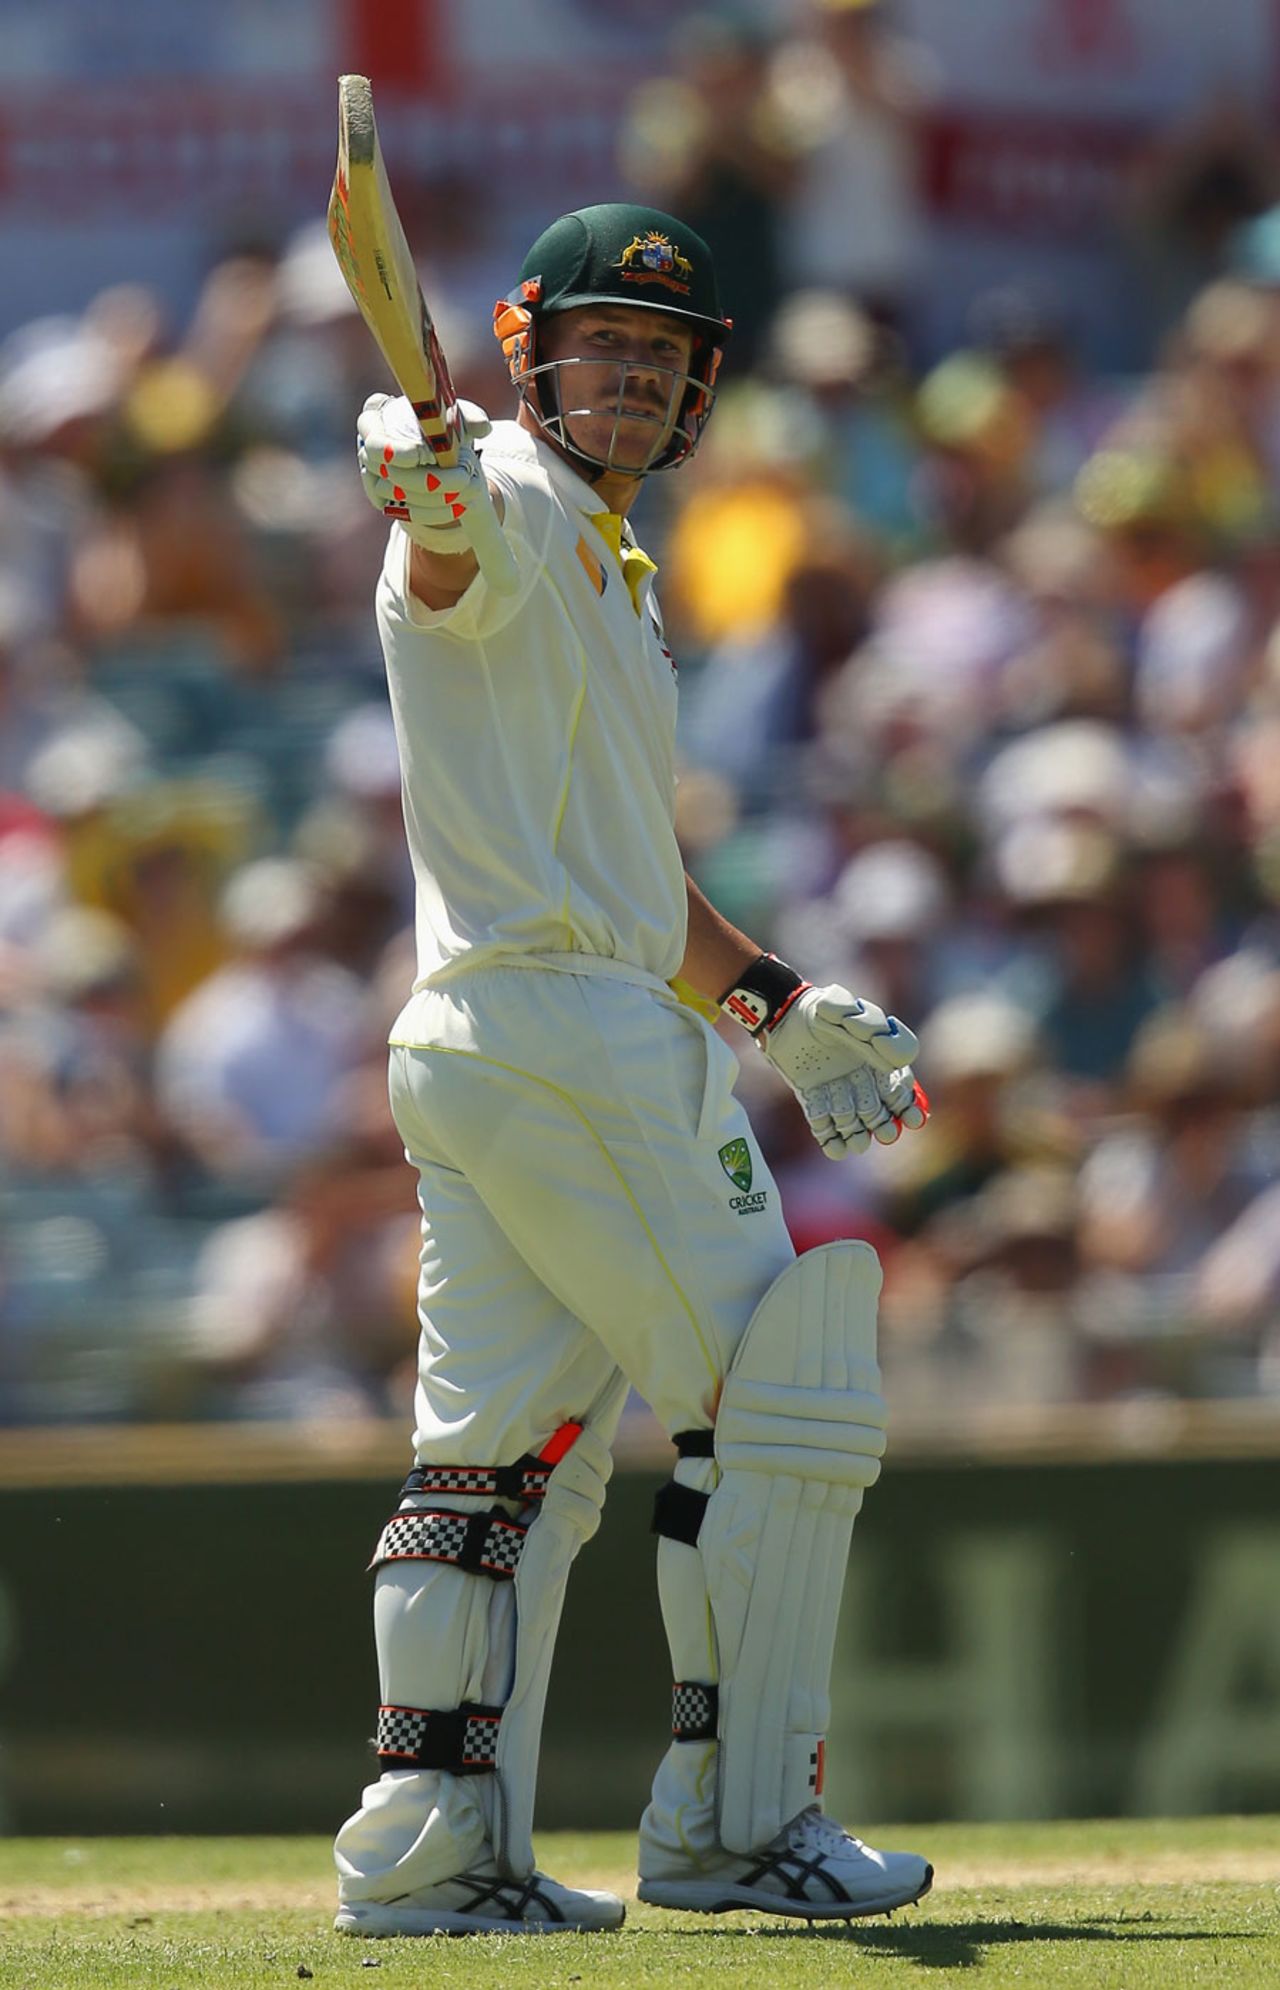 David Warner went past fifty for the fourth time in the series, Australia v England, 3rd Test, Perth, 3rd day, December 15, 2013